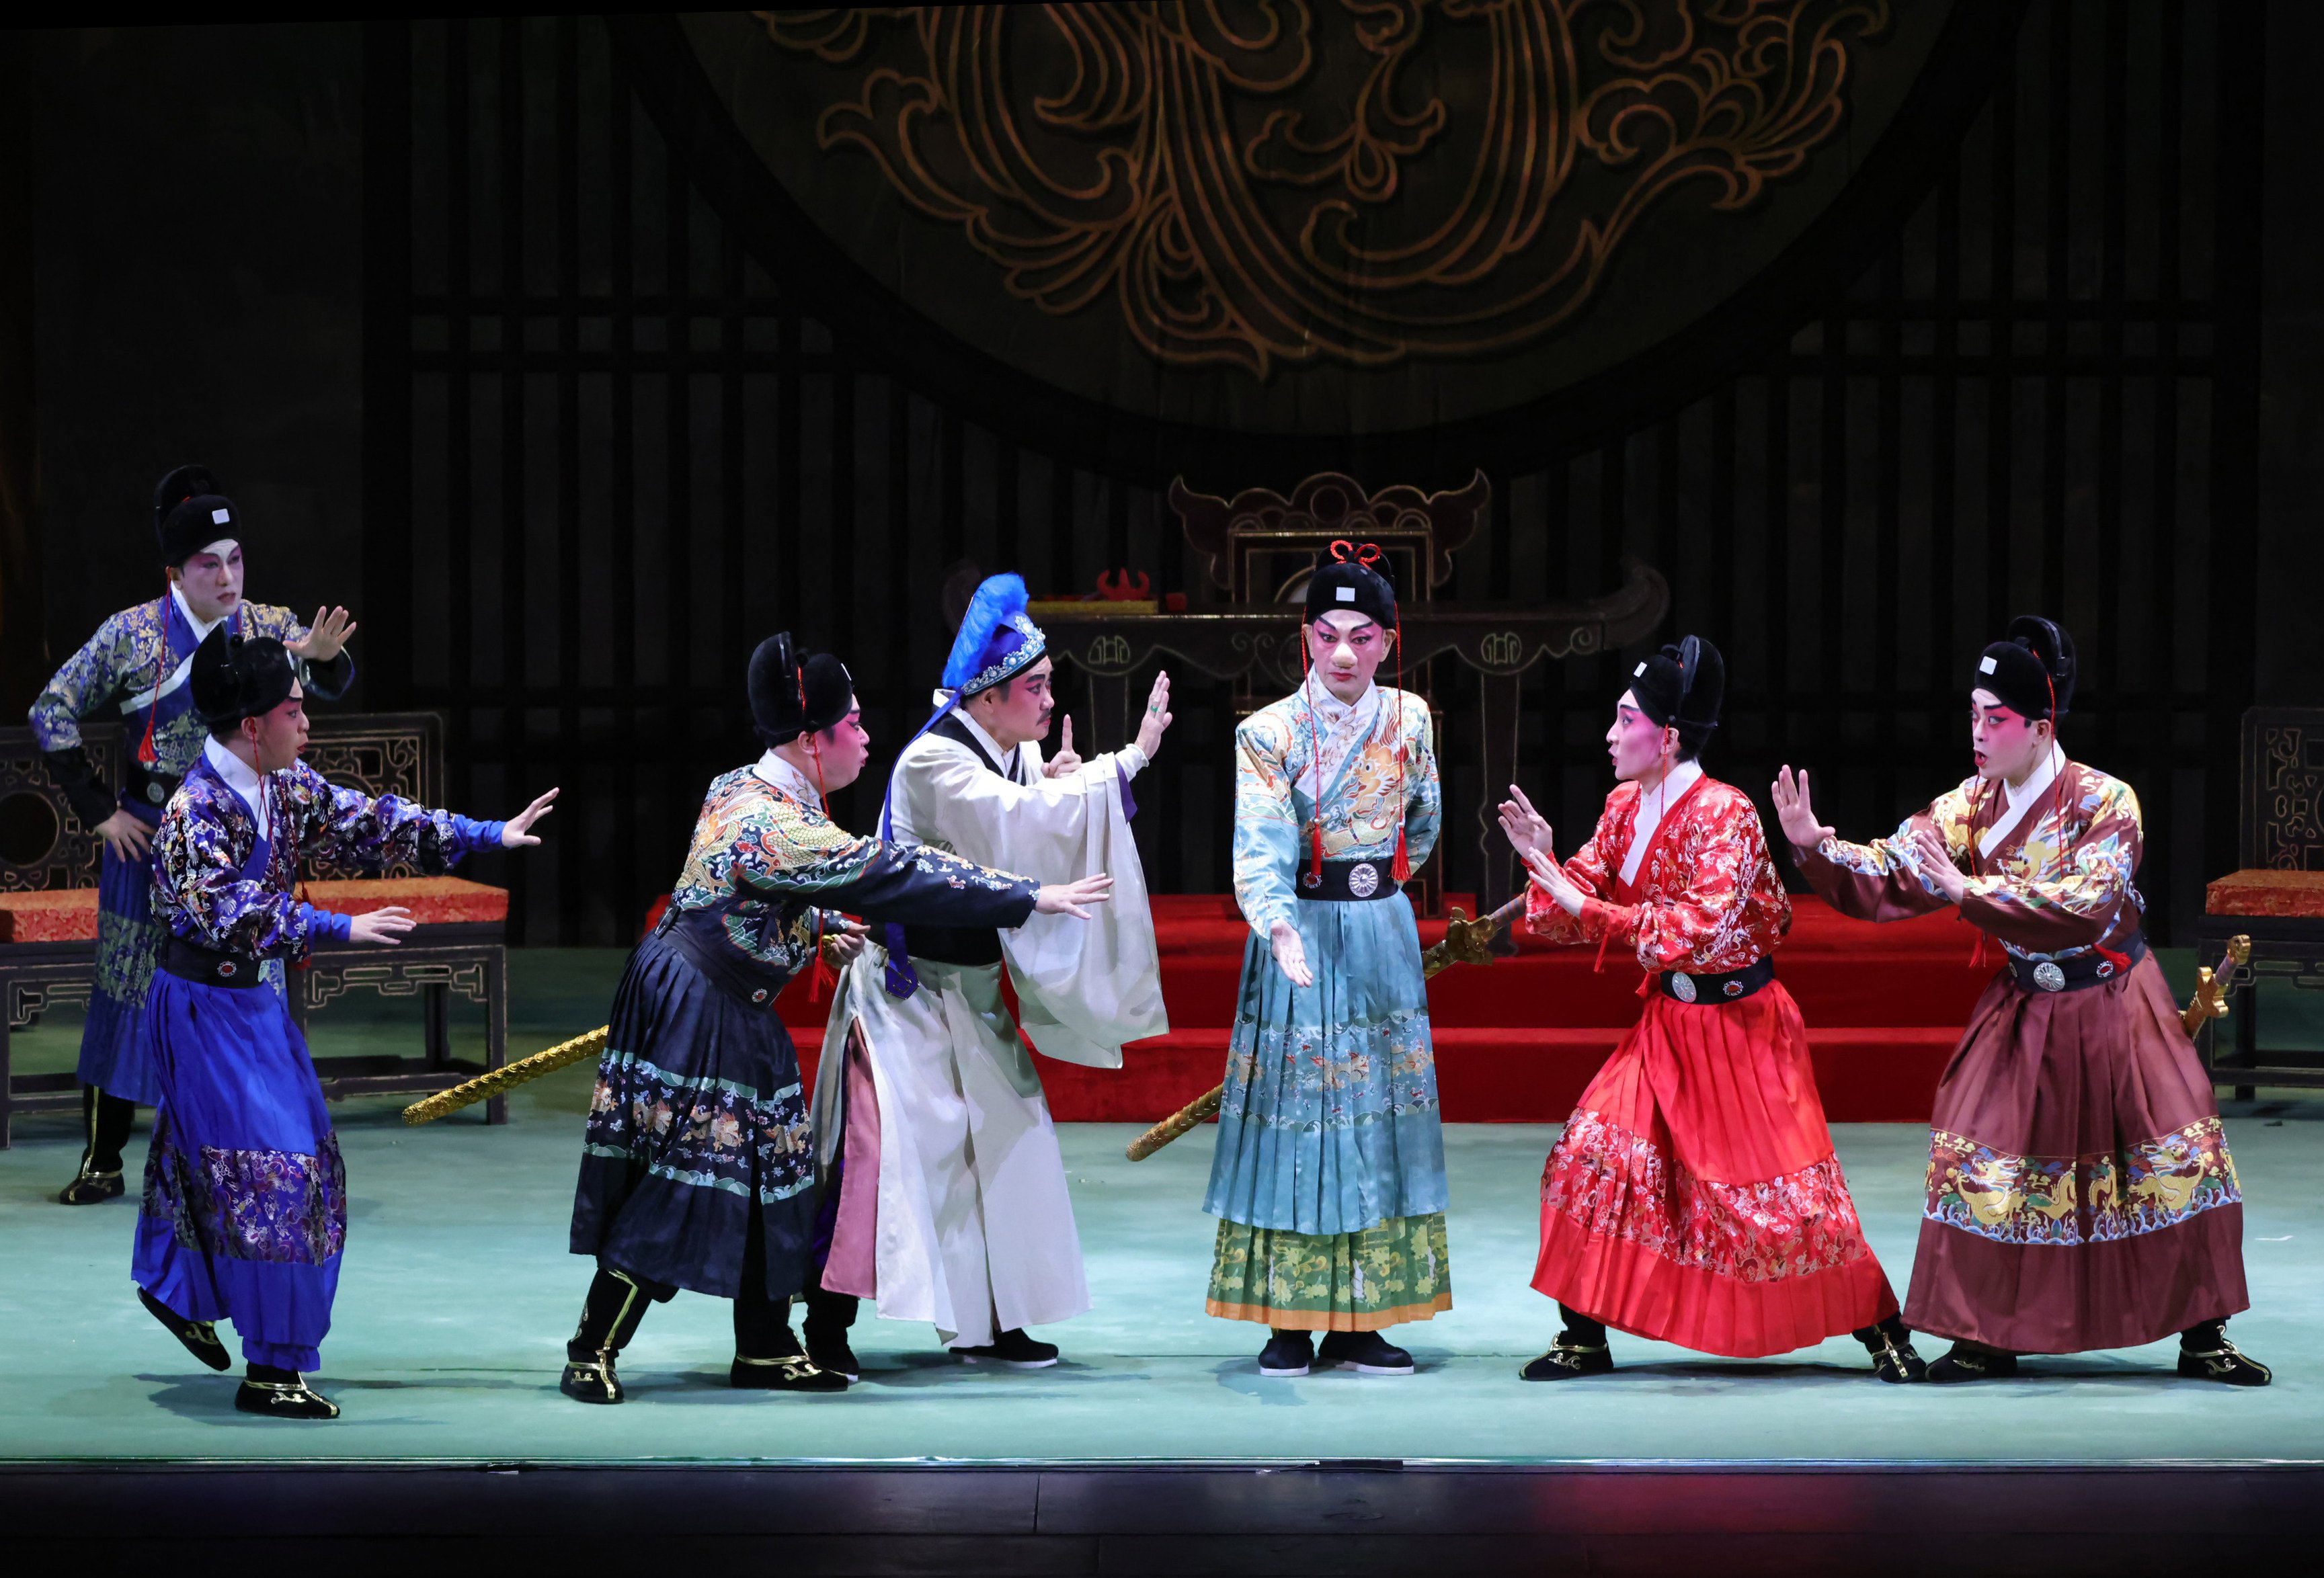 Law Ka-ying (centre) in a scene from his Cantonese opera adaptation of Cyrano de Bergerac, in which he starred with Sun Kim-long and Liza Wang Ming-chun and which he also directed. Photo: courtesy of the Chinese Culture Festival